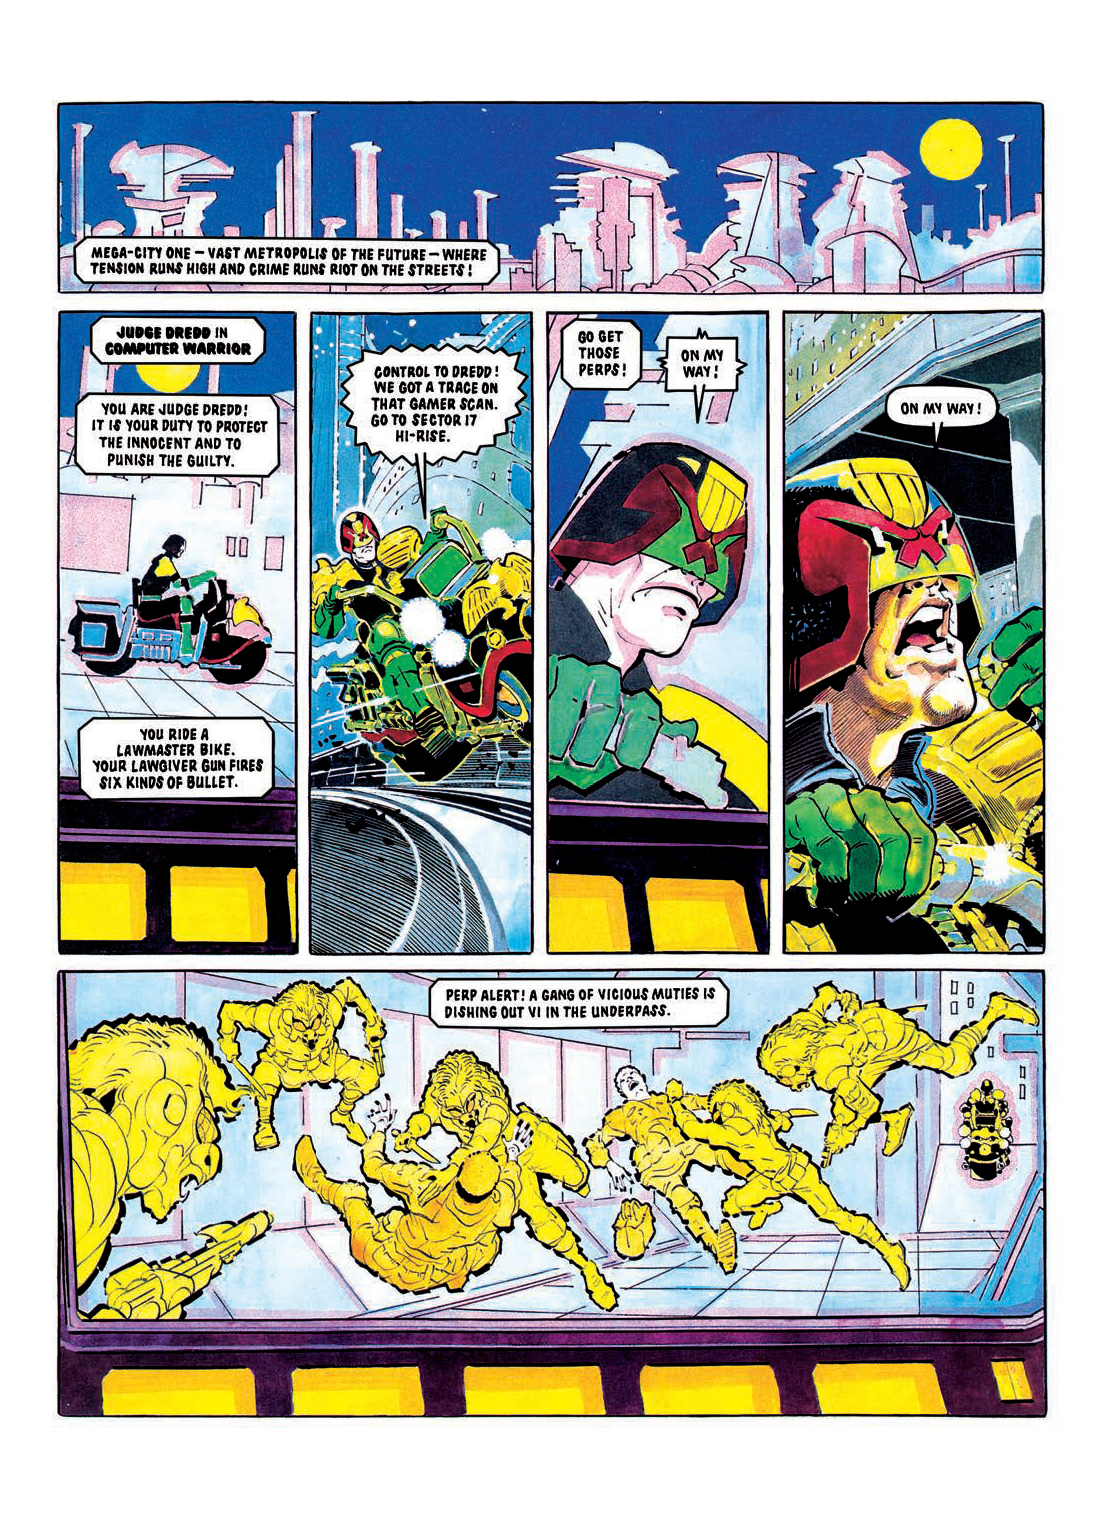 Read online Judge Dredd: The Restricted Files comic -  Issue # TPB 3 - 21